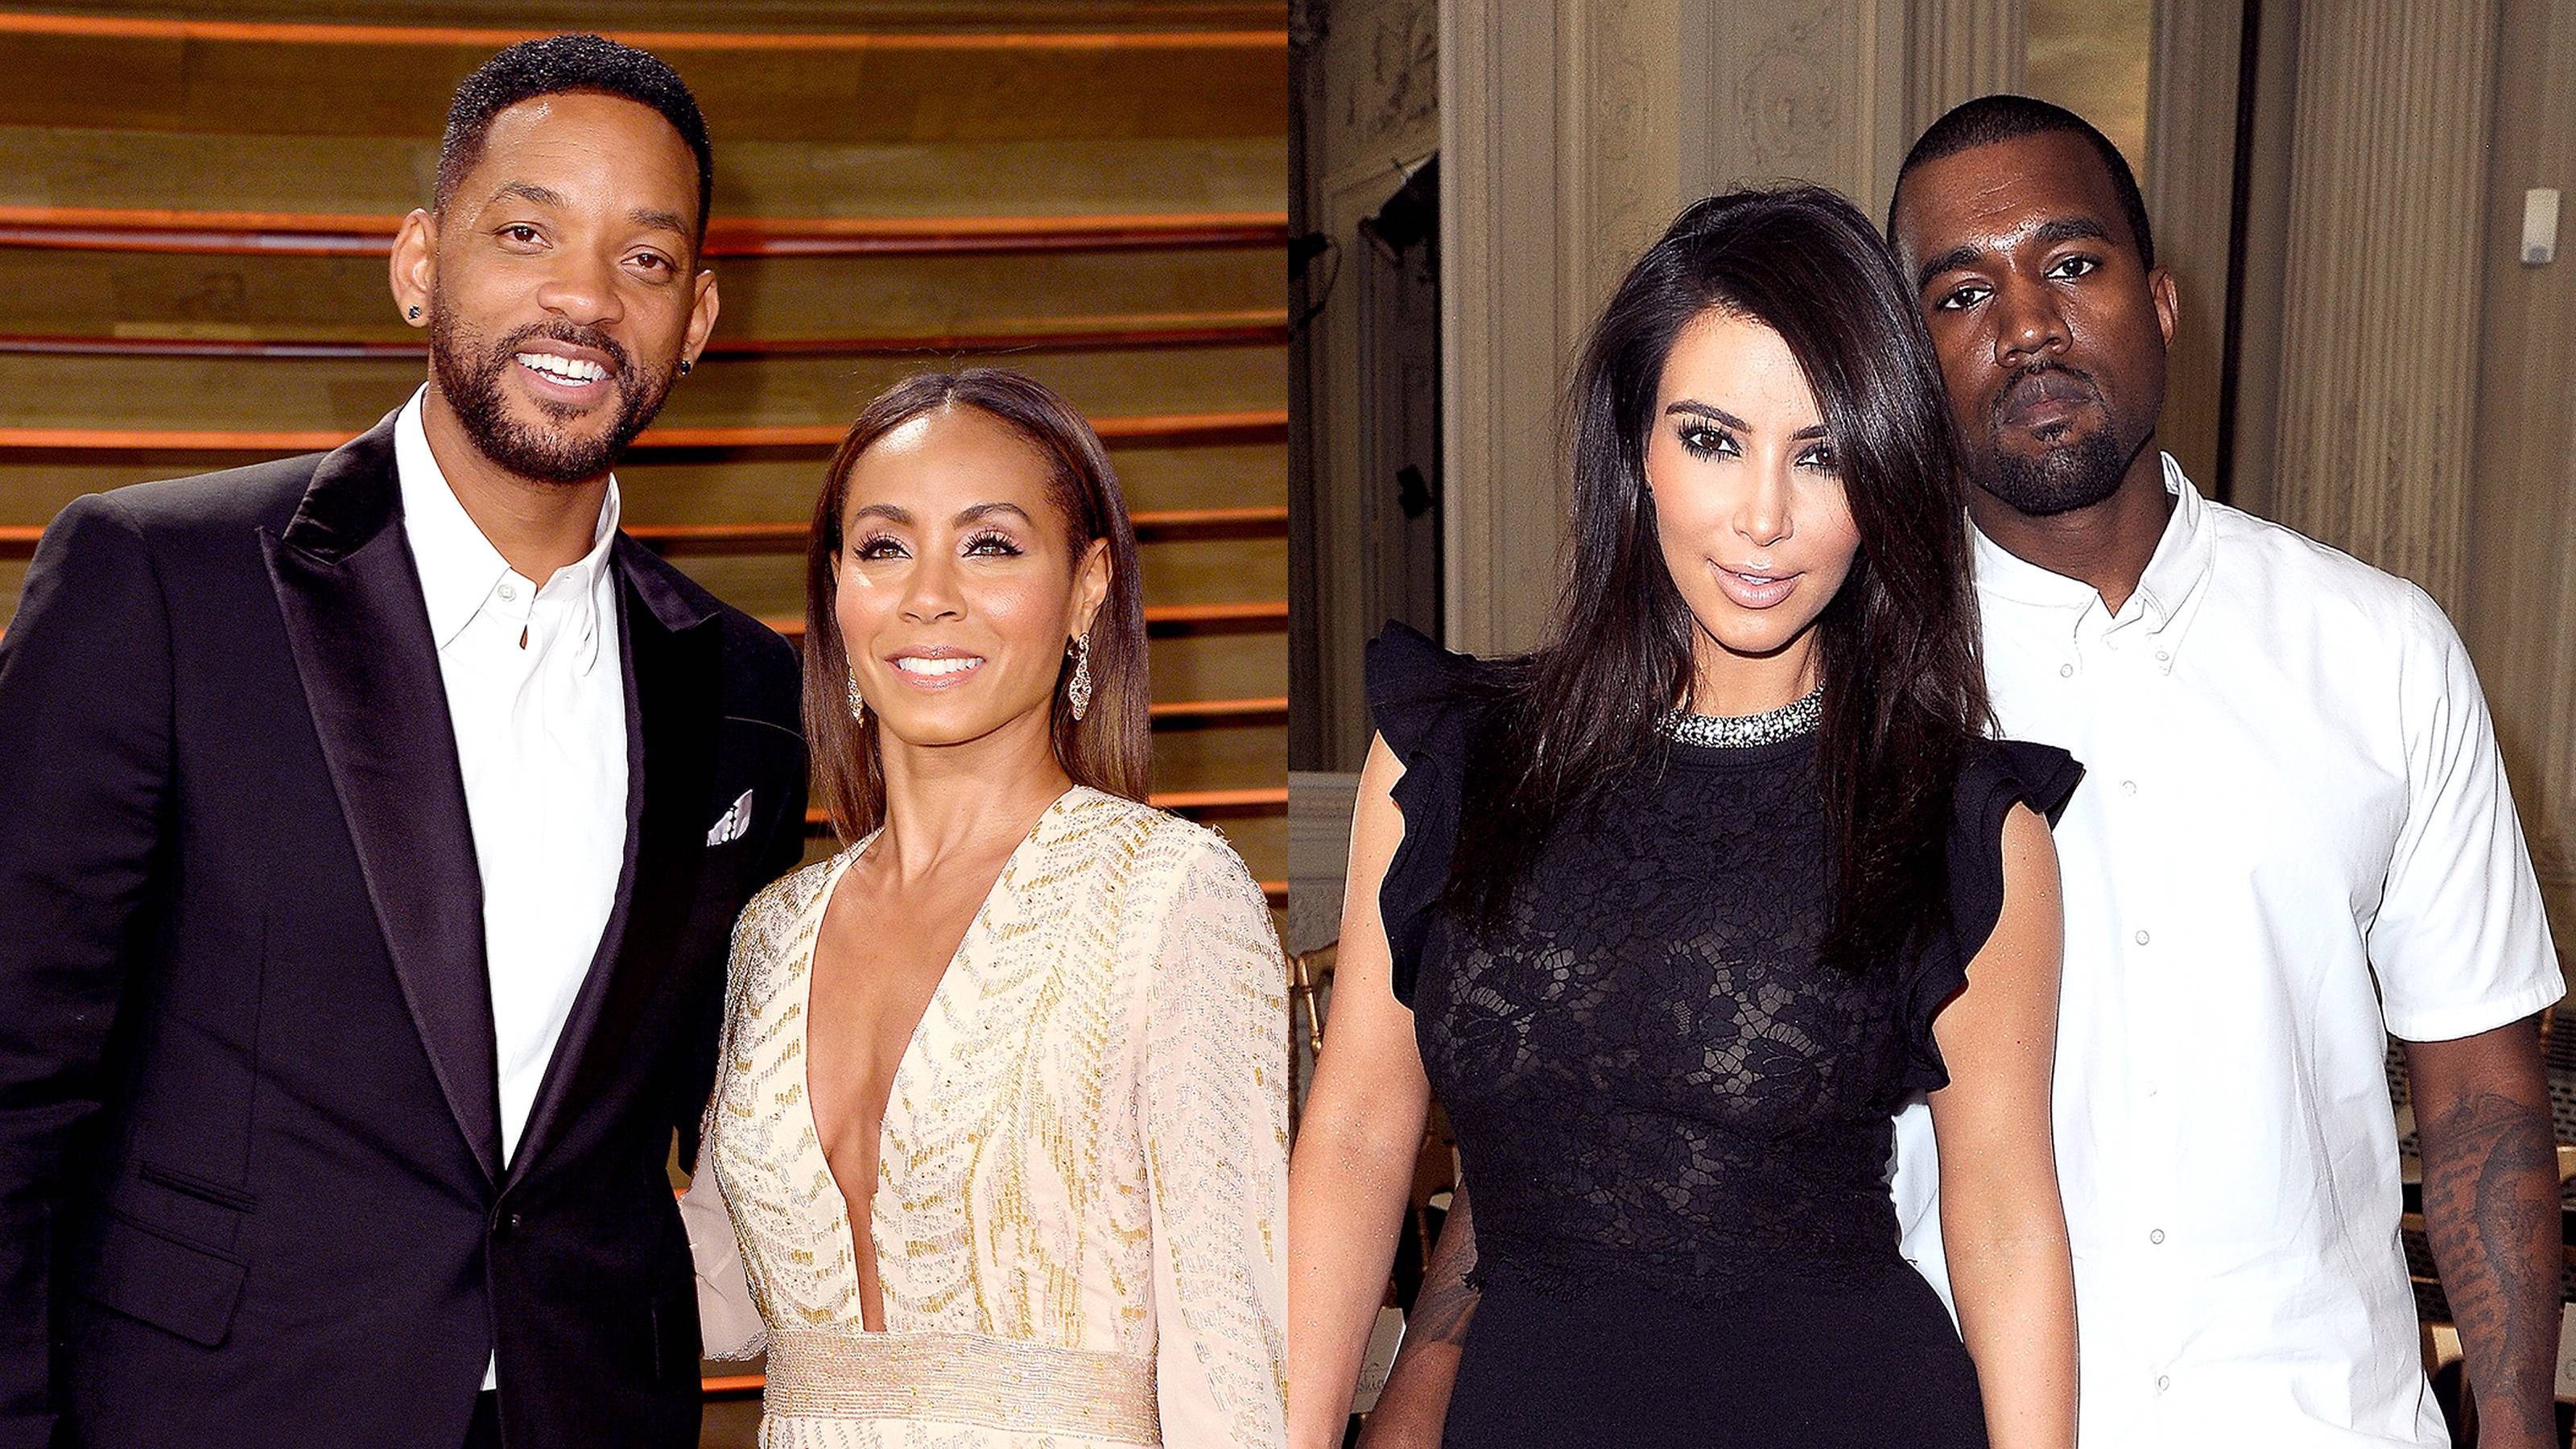 Celeb Couples Who Met in Unconventional Ways